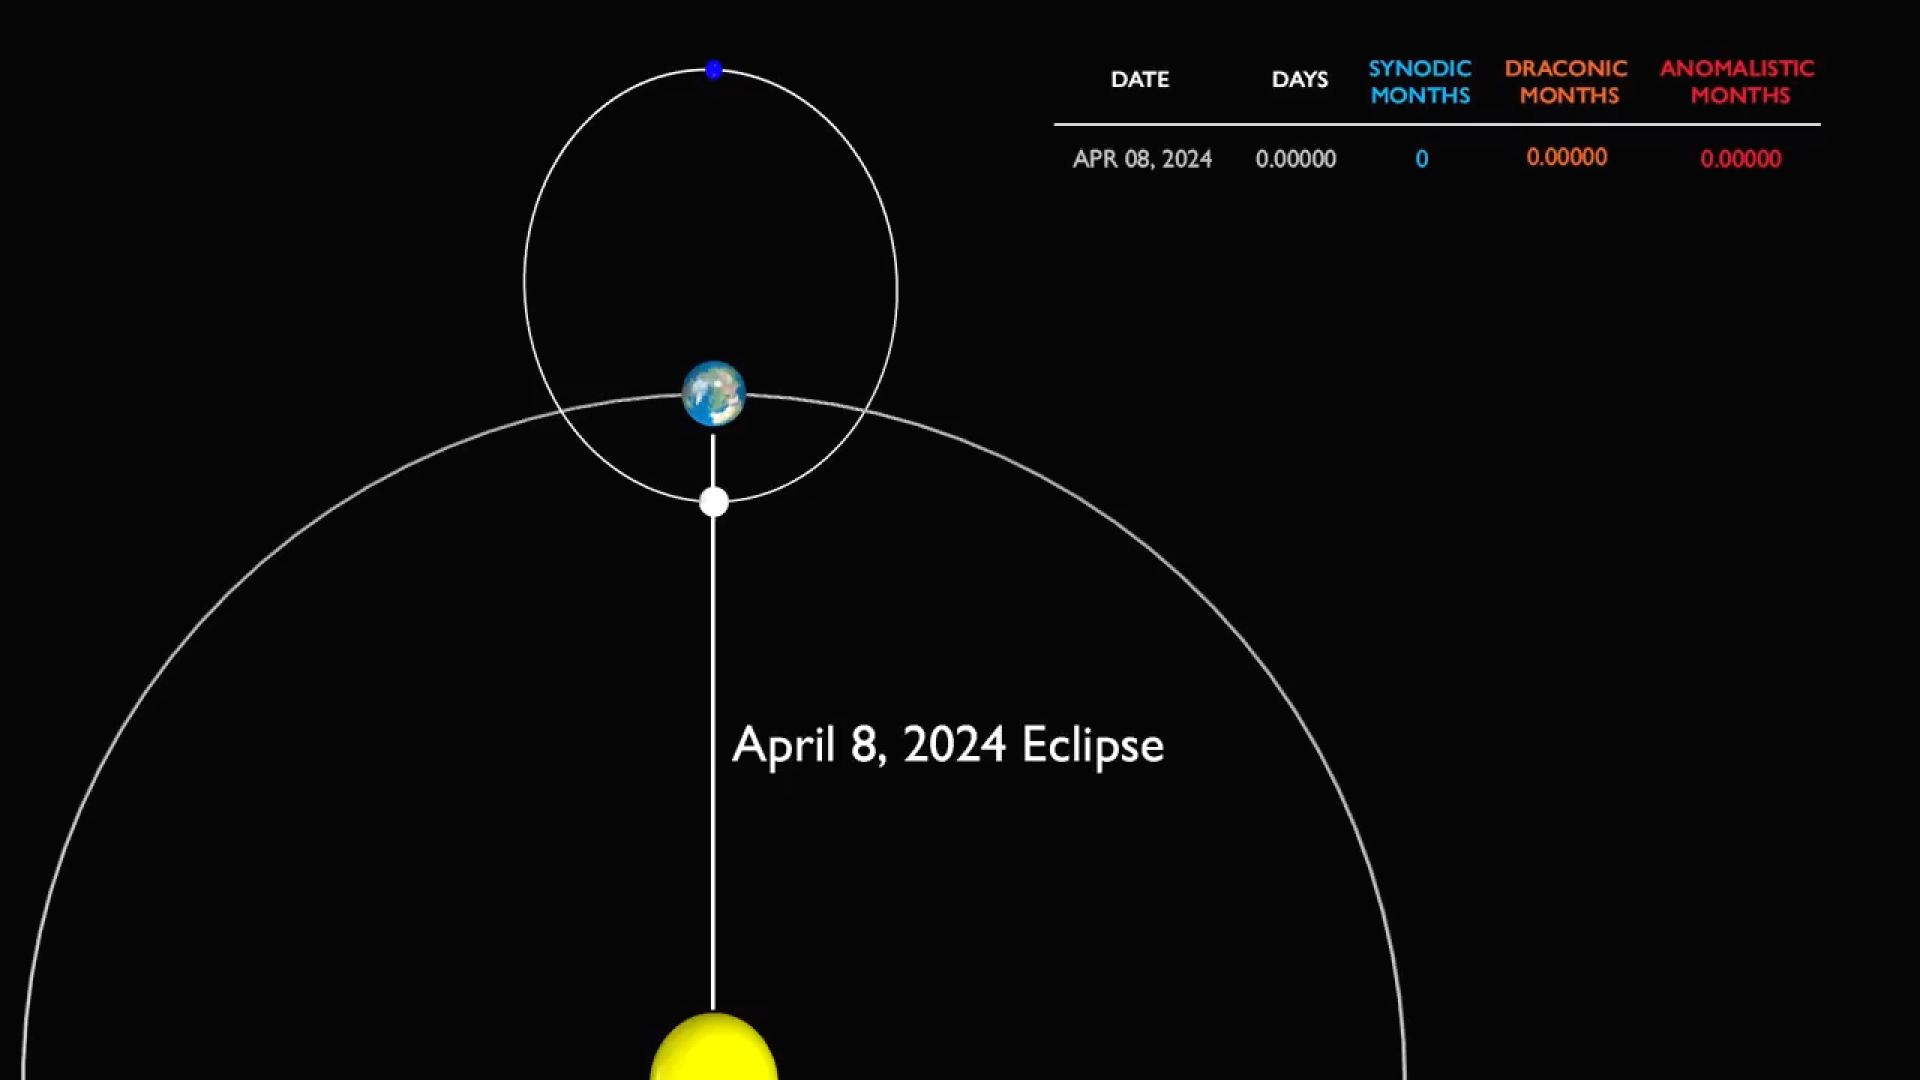 How Rare is the 8 April 2024 Eclipse